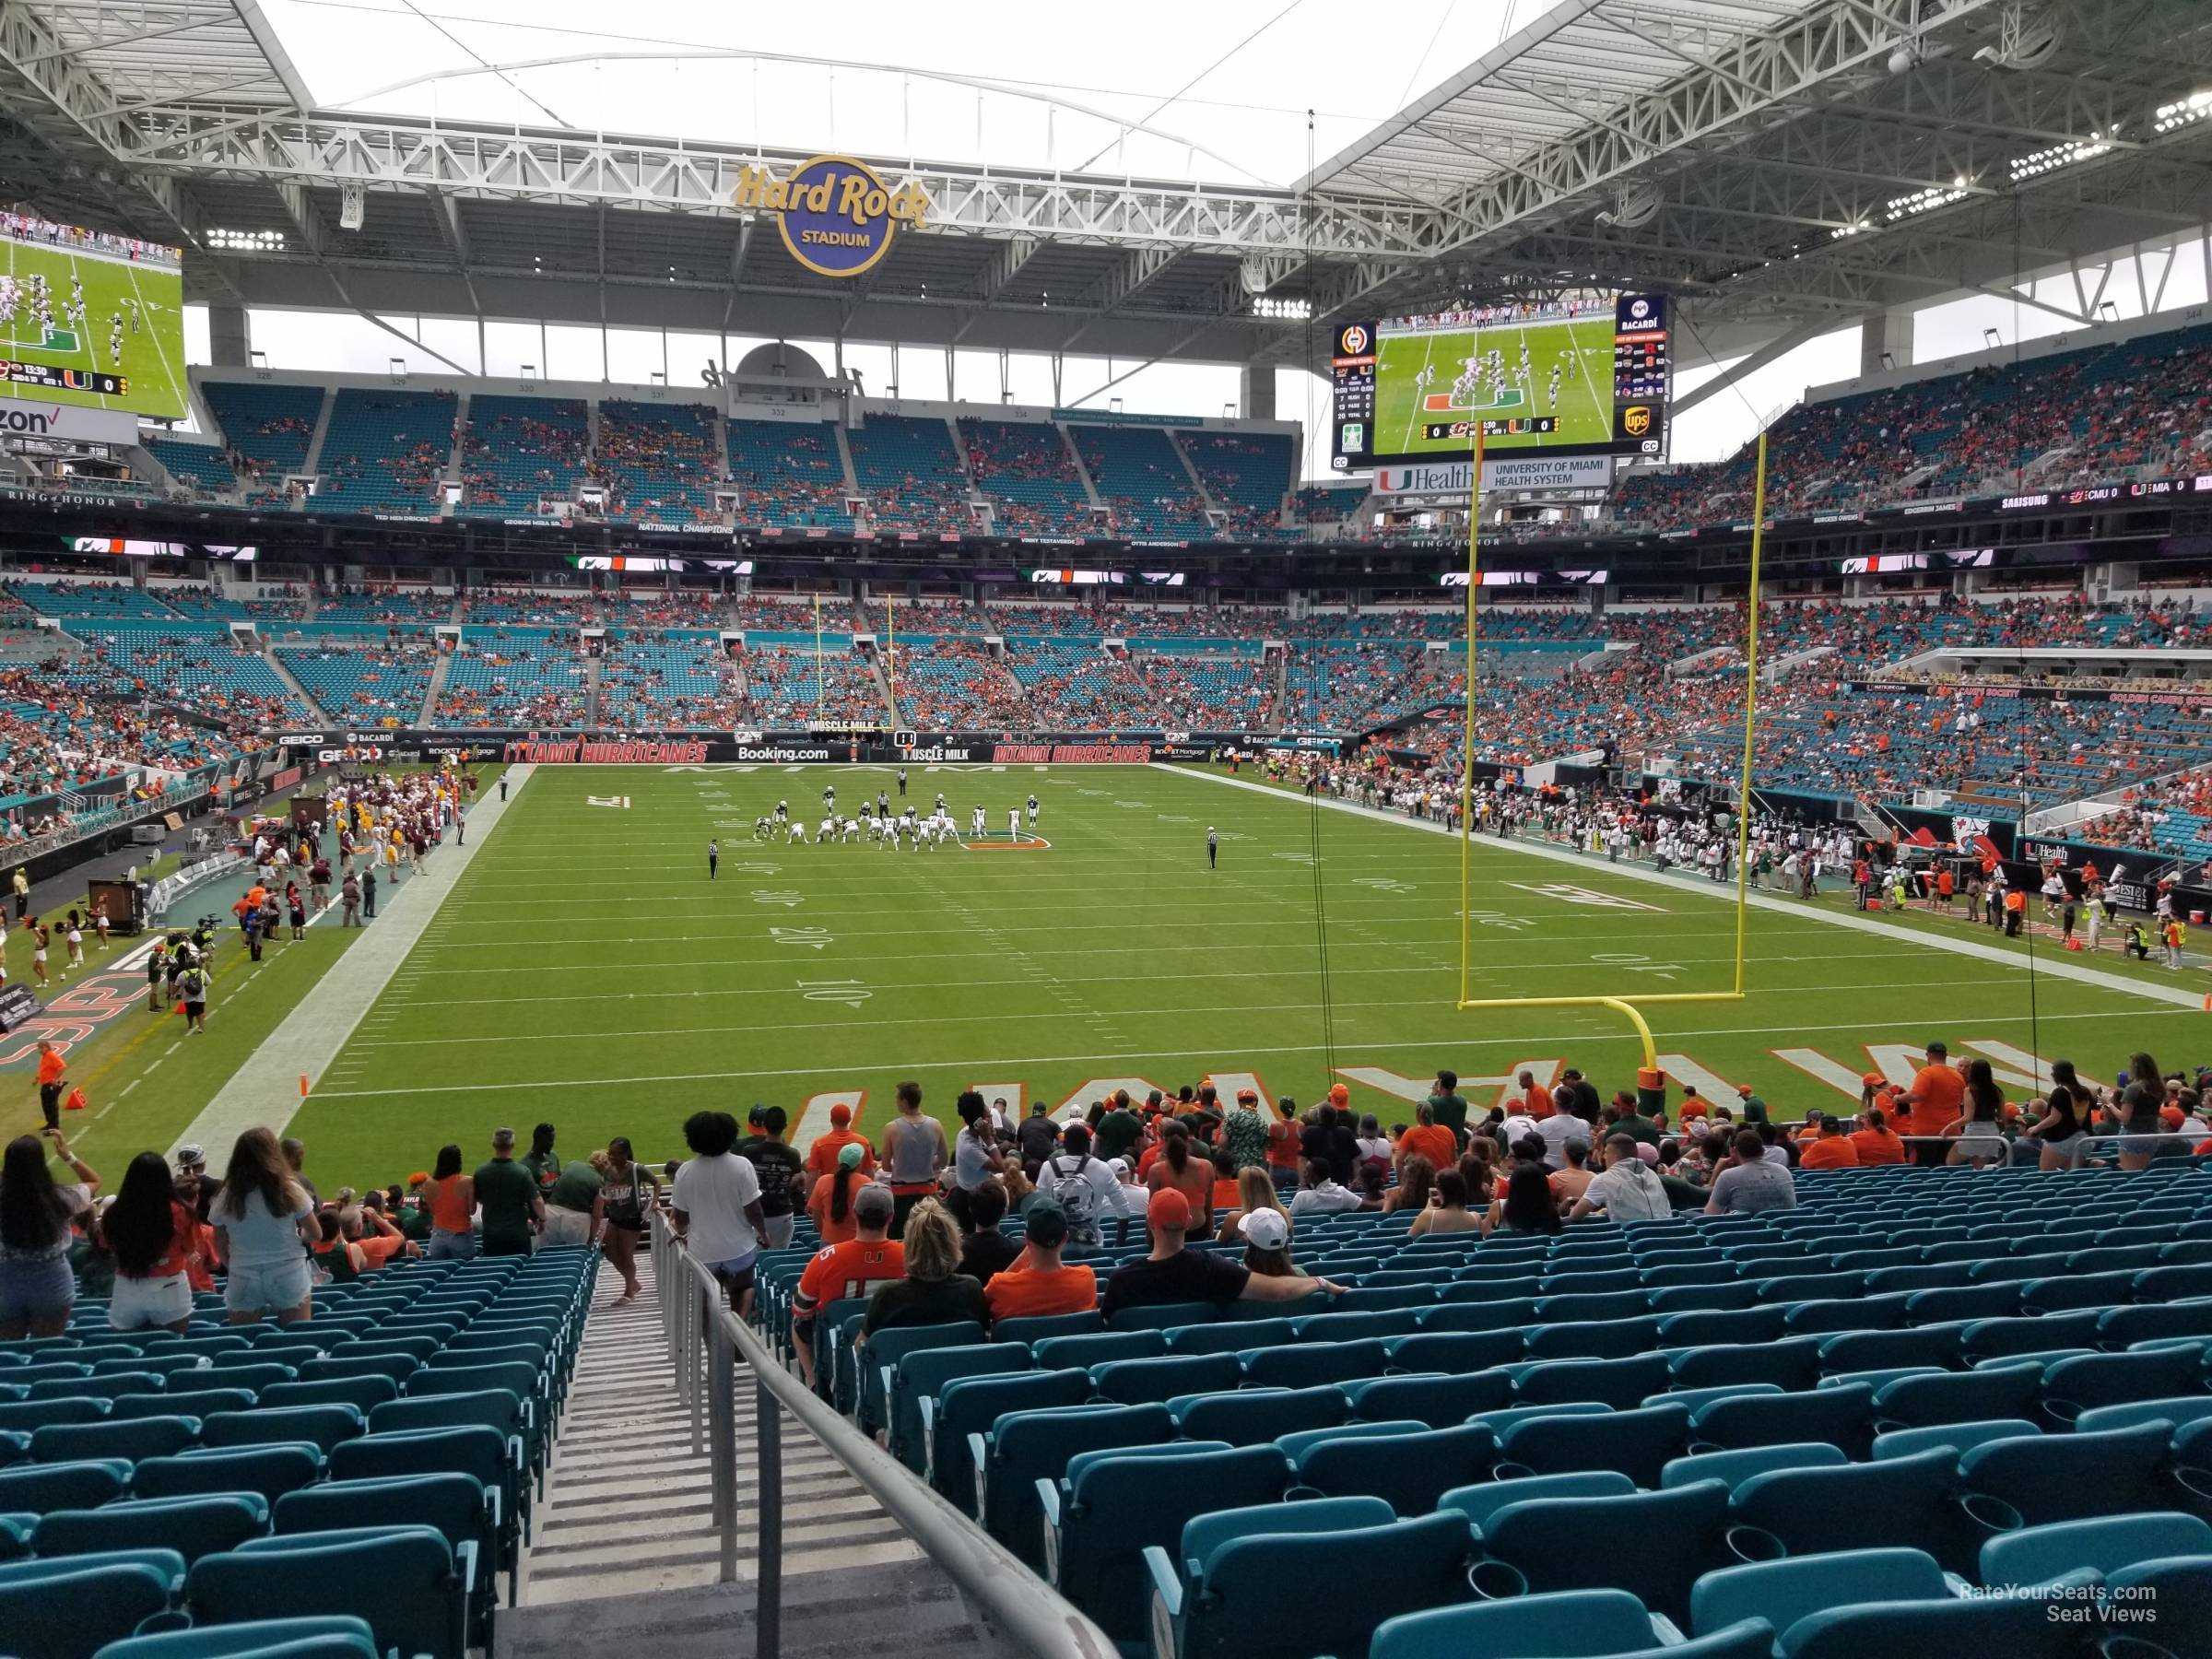 section 105, row 28 seat view  for football - hard rock stadium